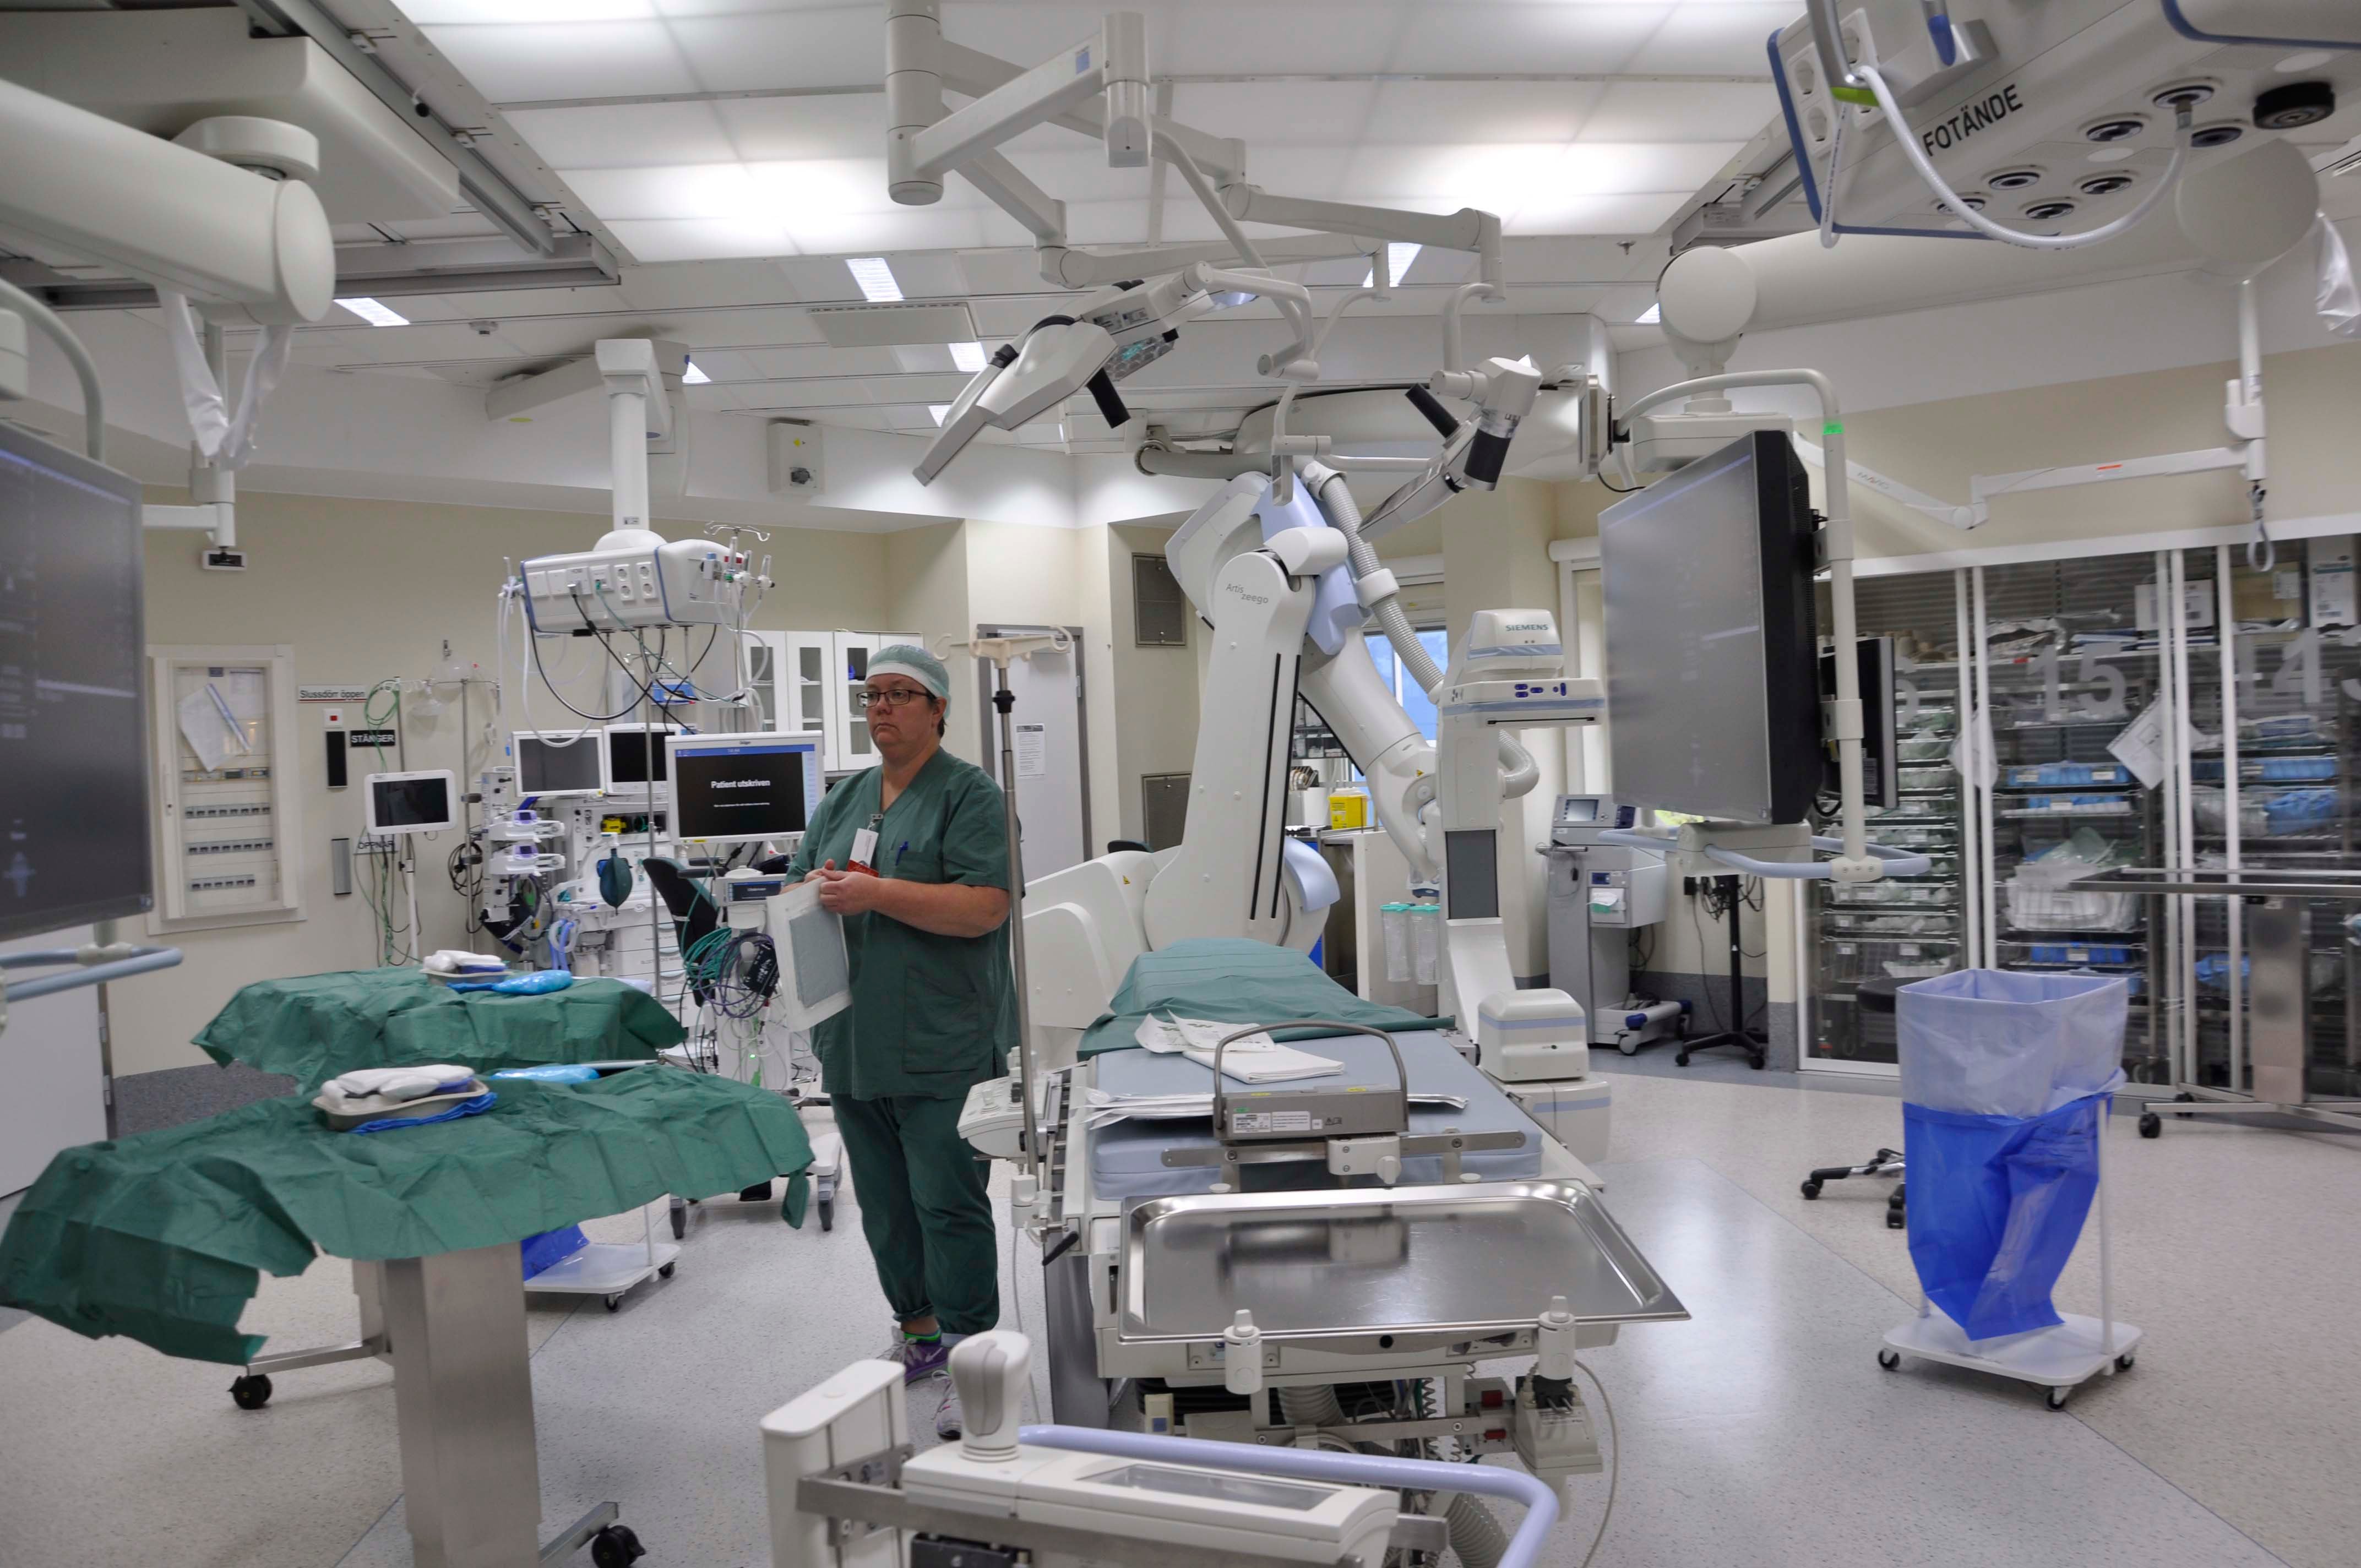 Healthcare personnel stand and prepare for surgery in the operating theatre